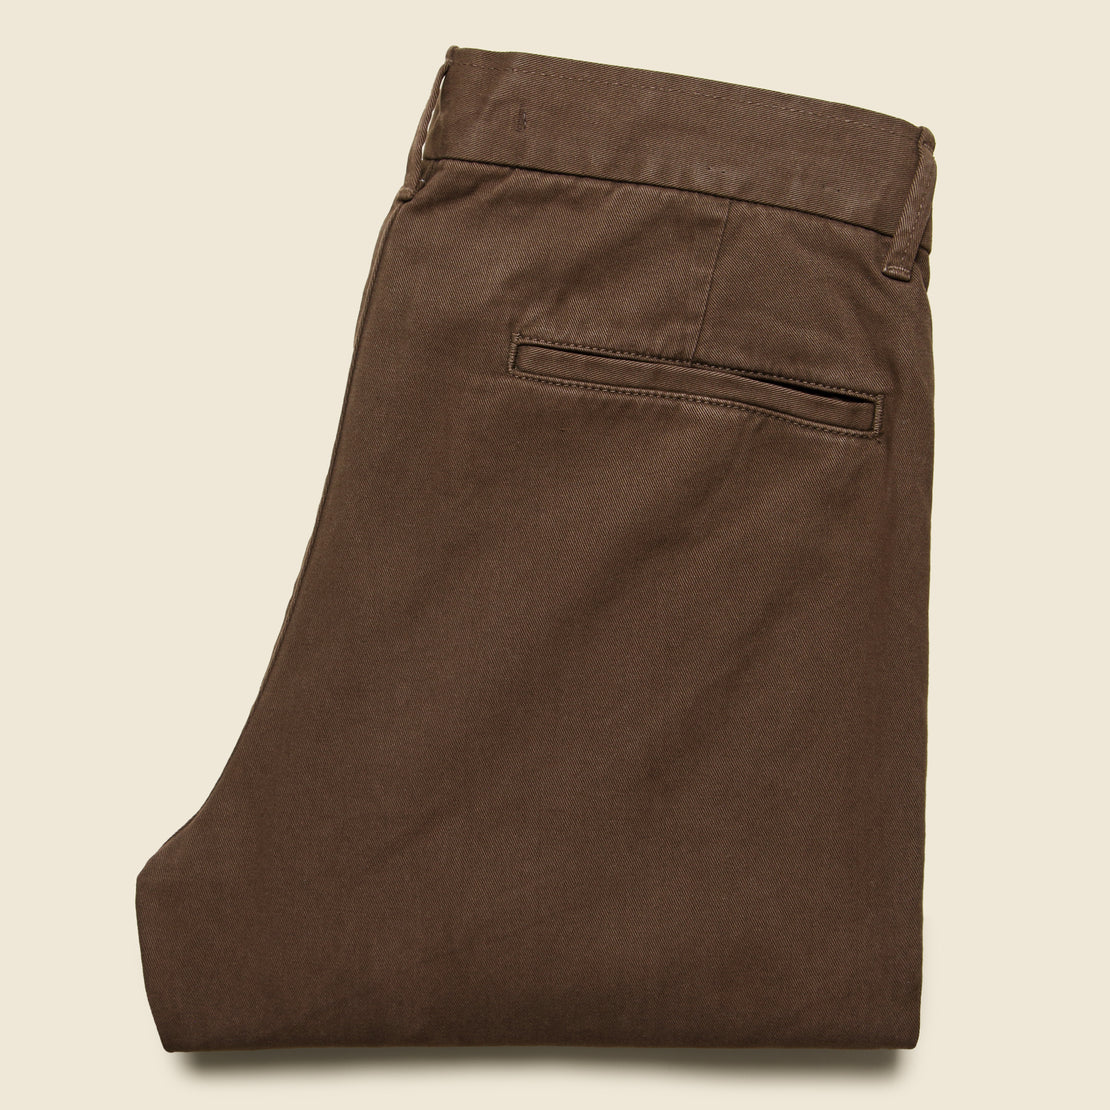 Weekend Chino - Woodshire - Life After Denim - STAG Provisions - Pants - Twill